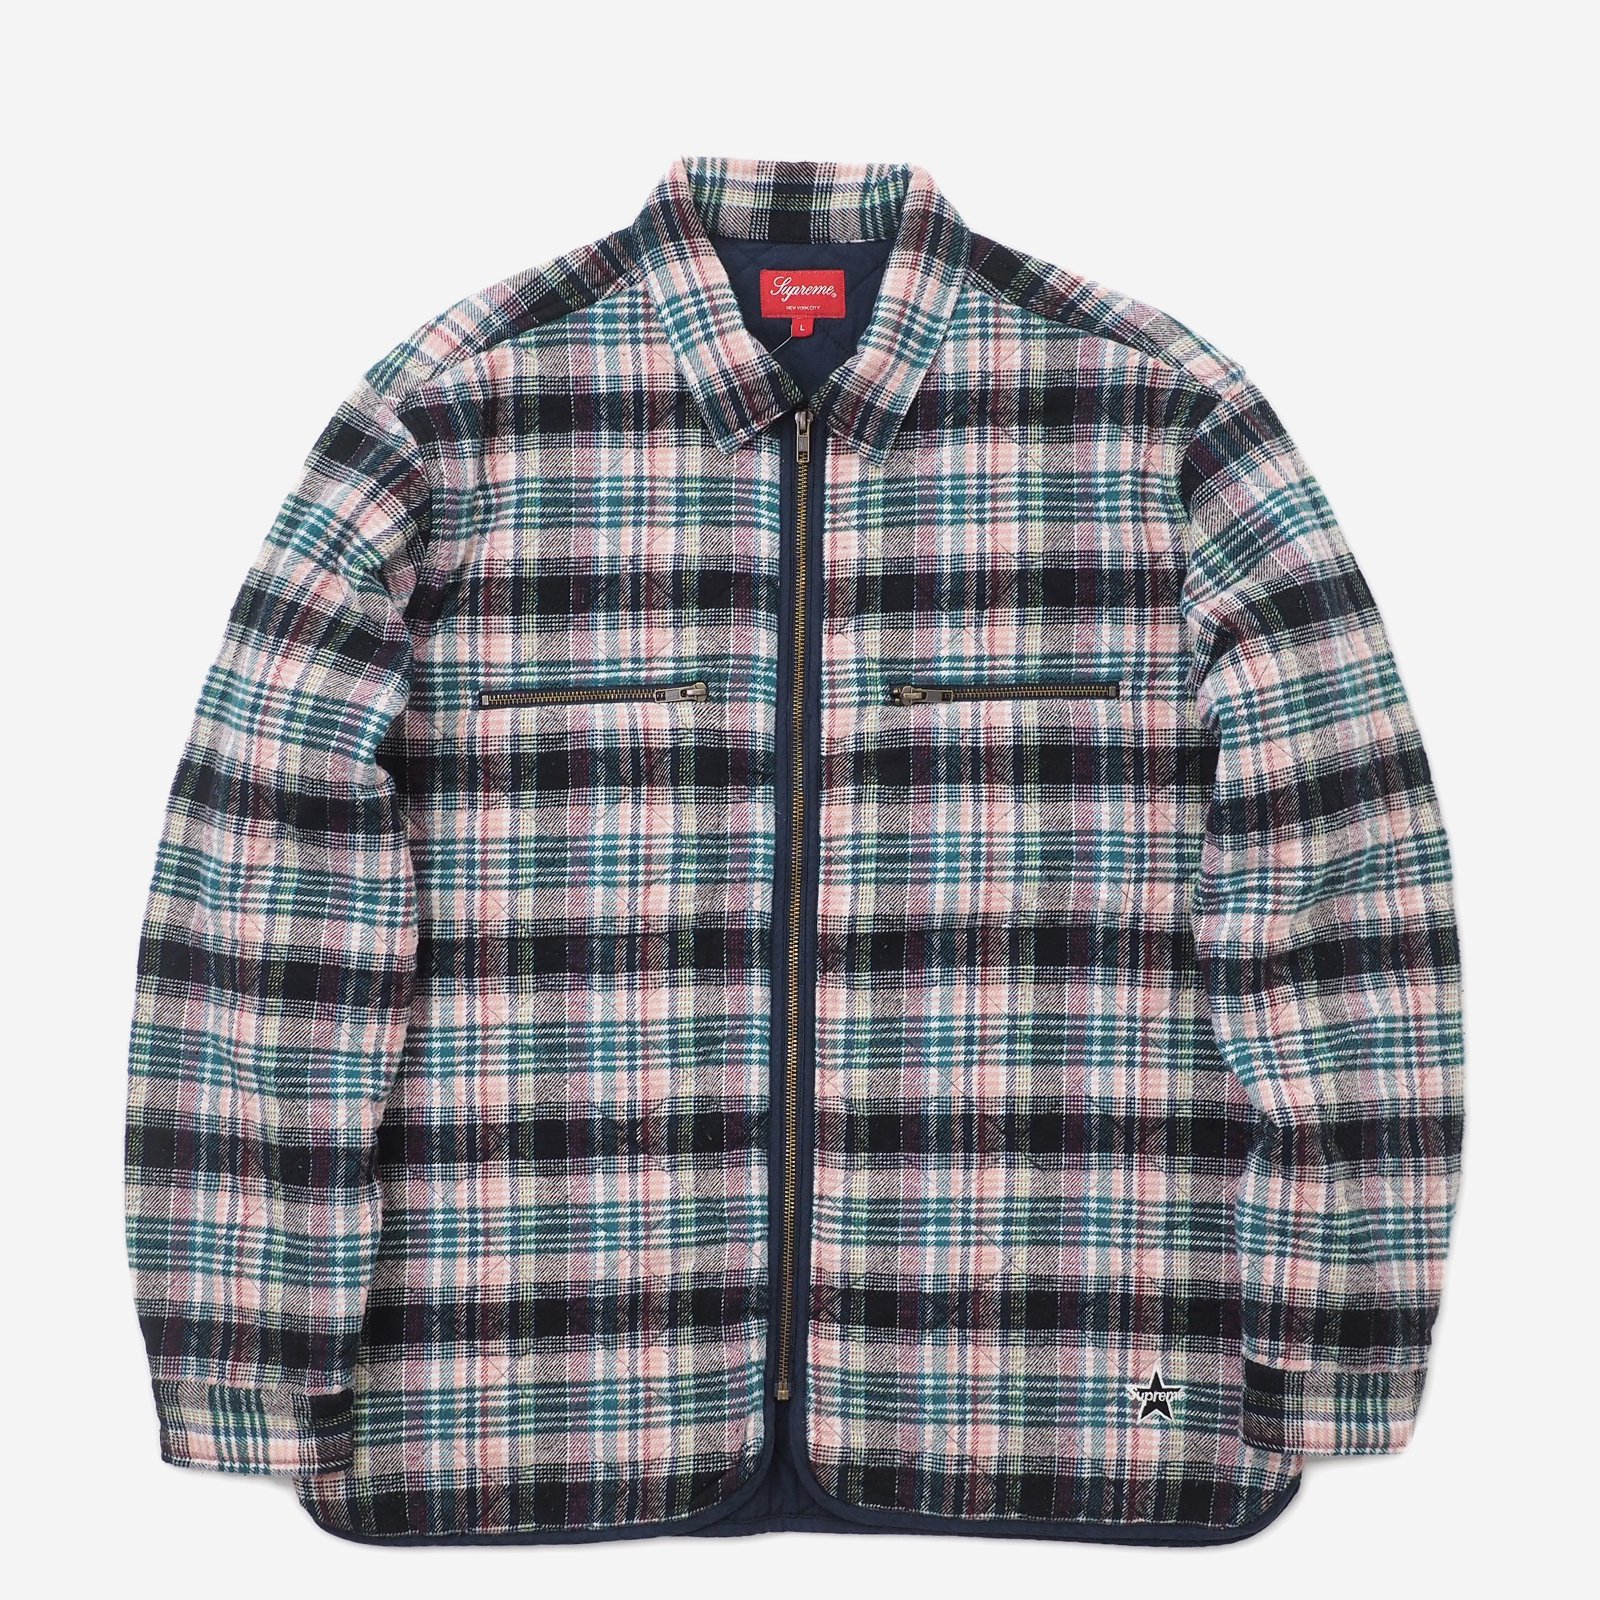 supreme Quilted Plaid Zip Up Shirt black